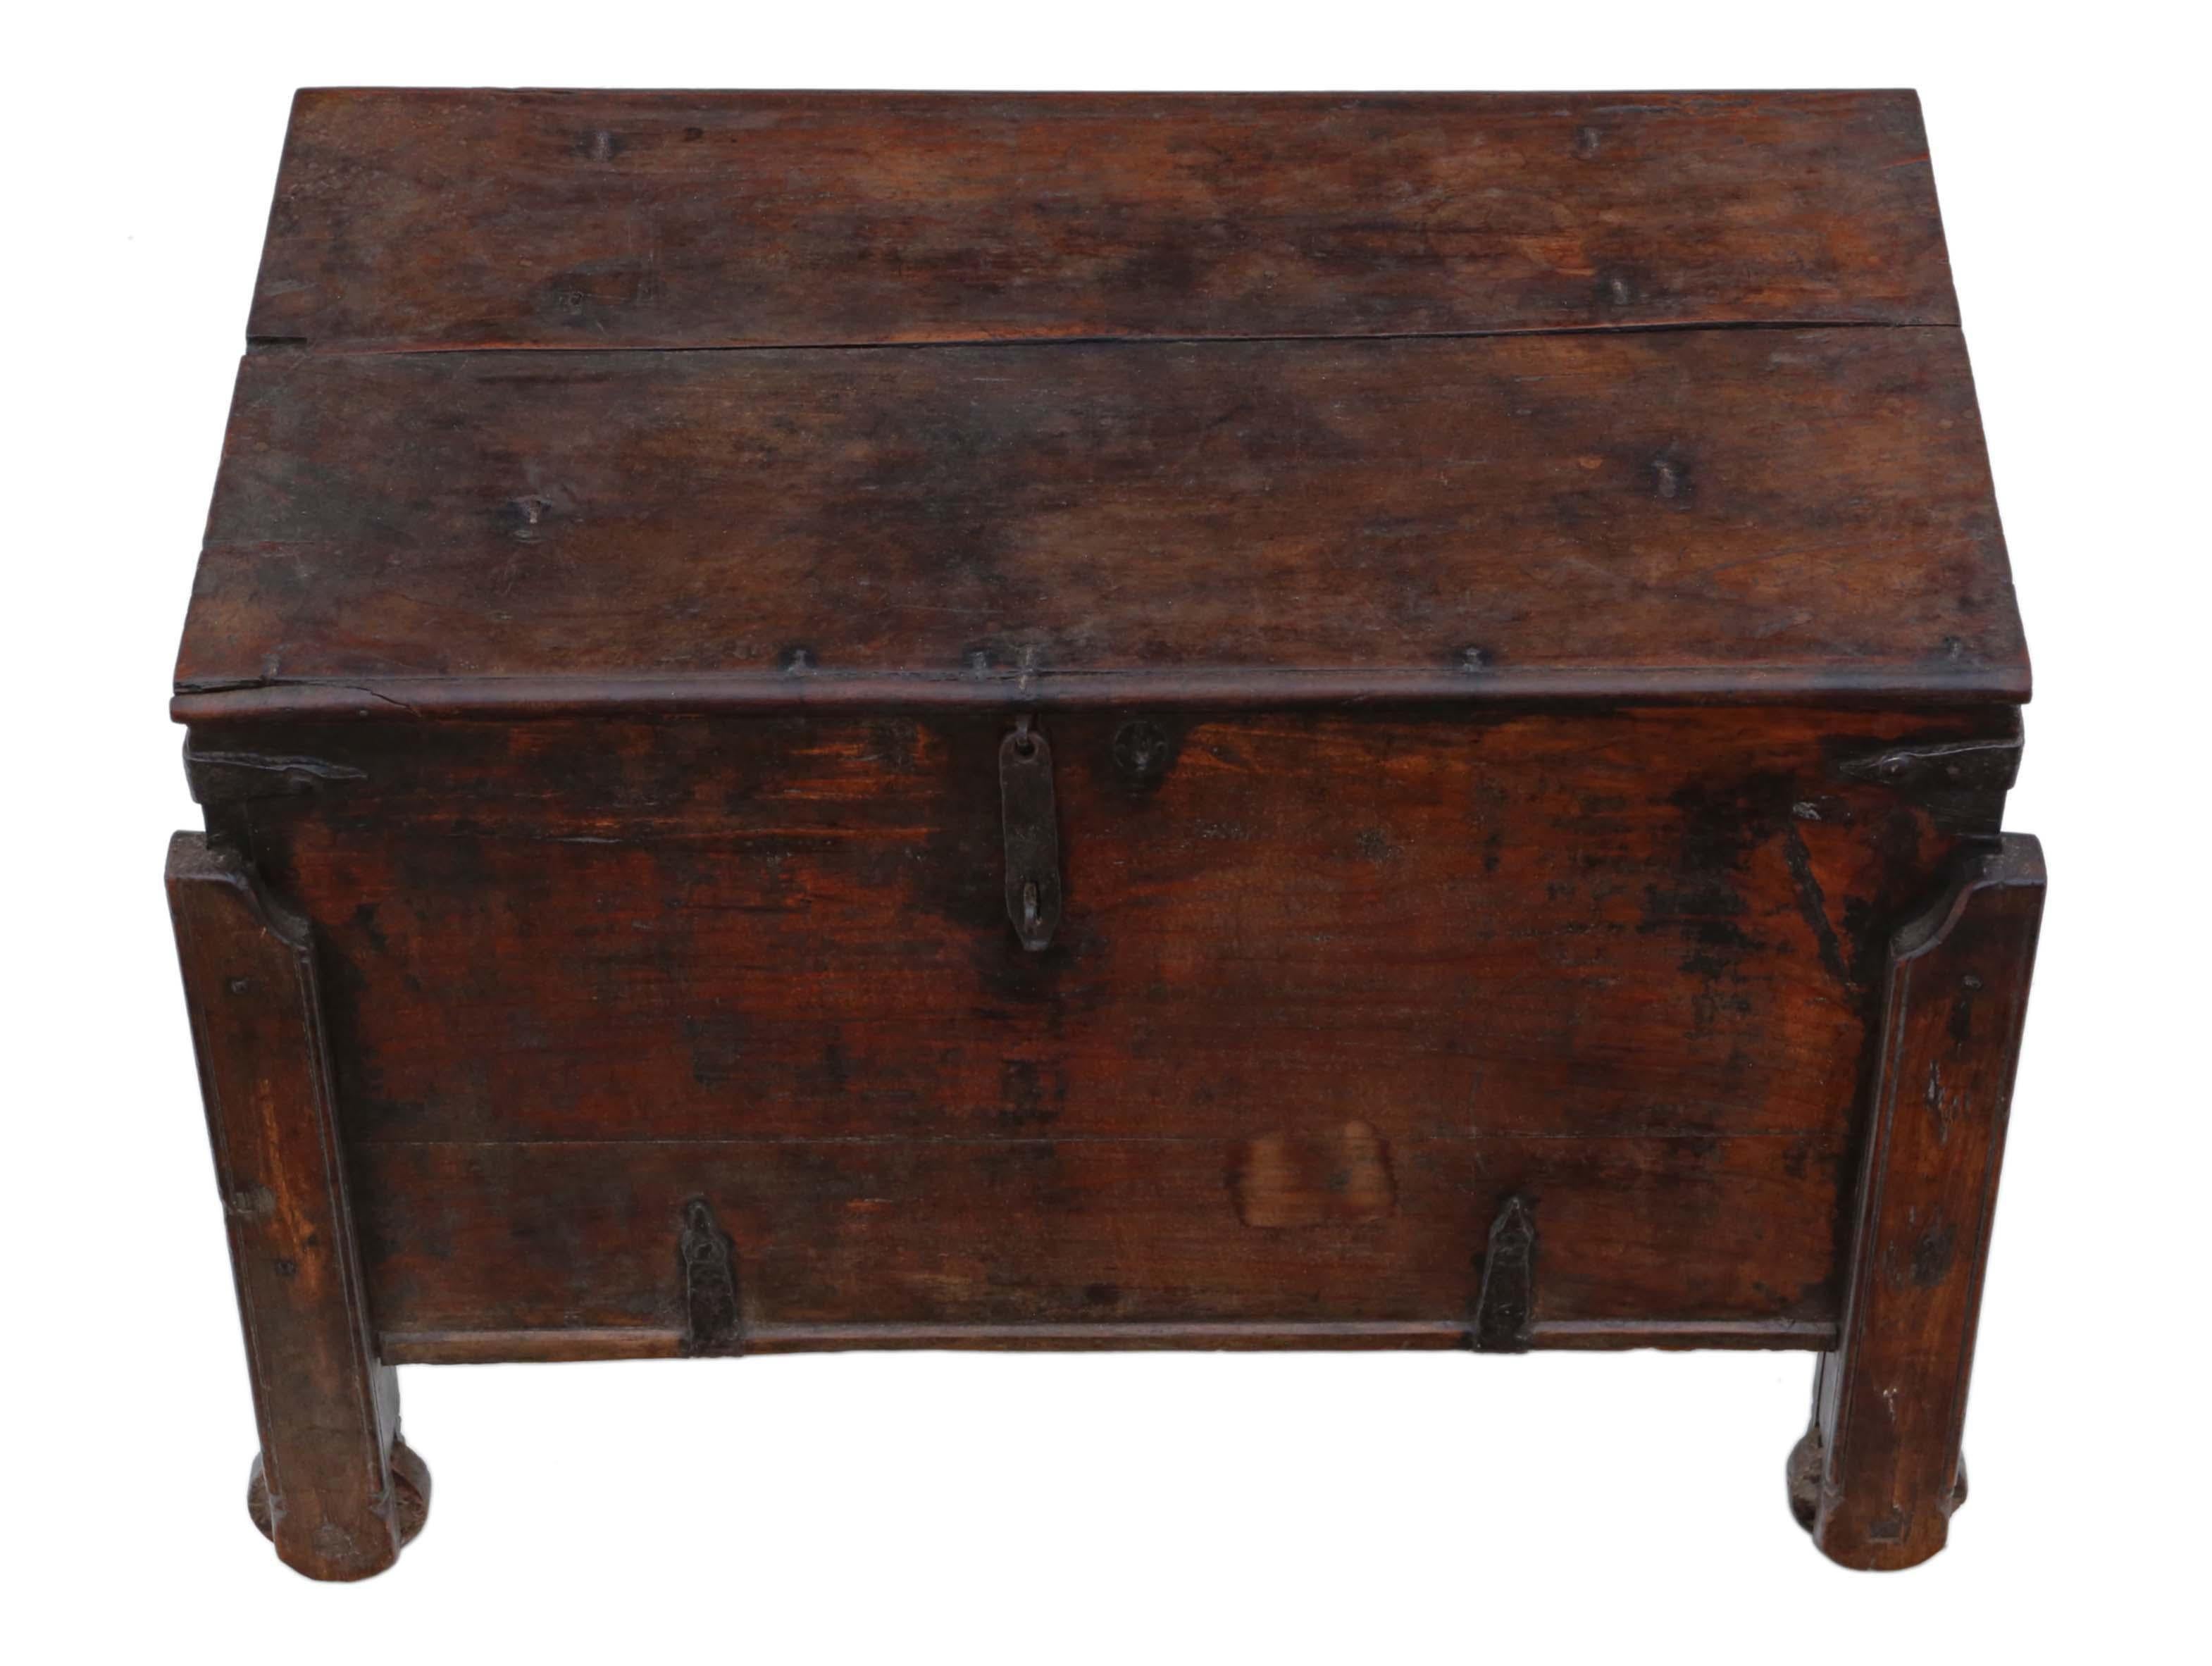 Antique 18th Century Indian/ Oriental hardwood coffer or chest. Later 19th Century corner posts with wooden wheels. Very unusual and rare.

No loose joints or woodworm. Full of age, character and charm.

Lovely iron strapping, handles and